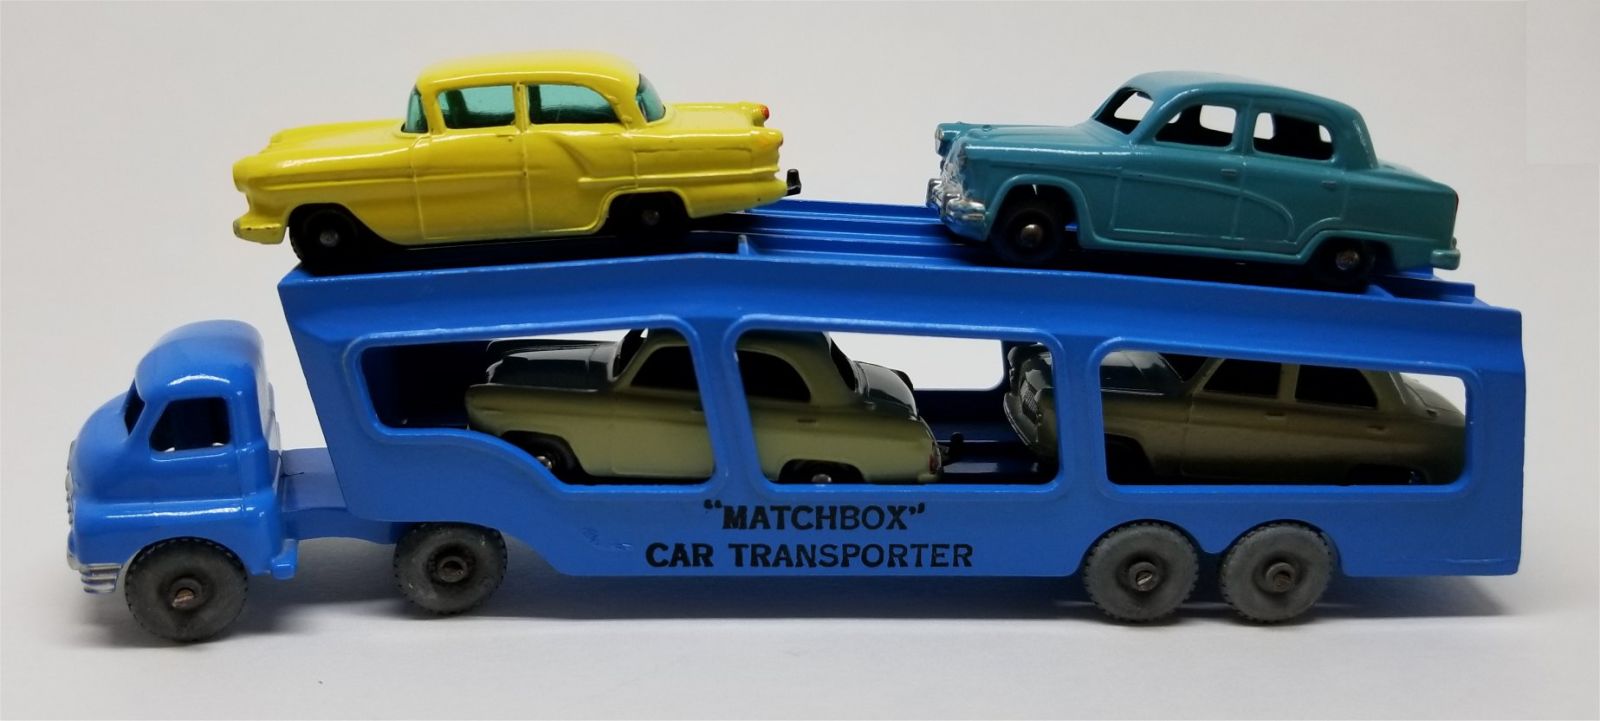 Illustration for article titled [REVIEW] Lesney Matchbox Accessory Pack Car Transporter